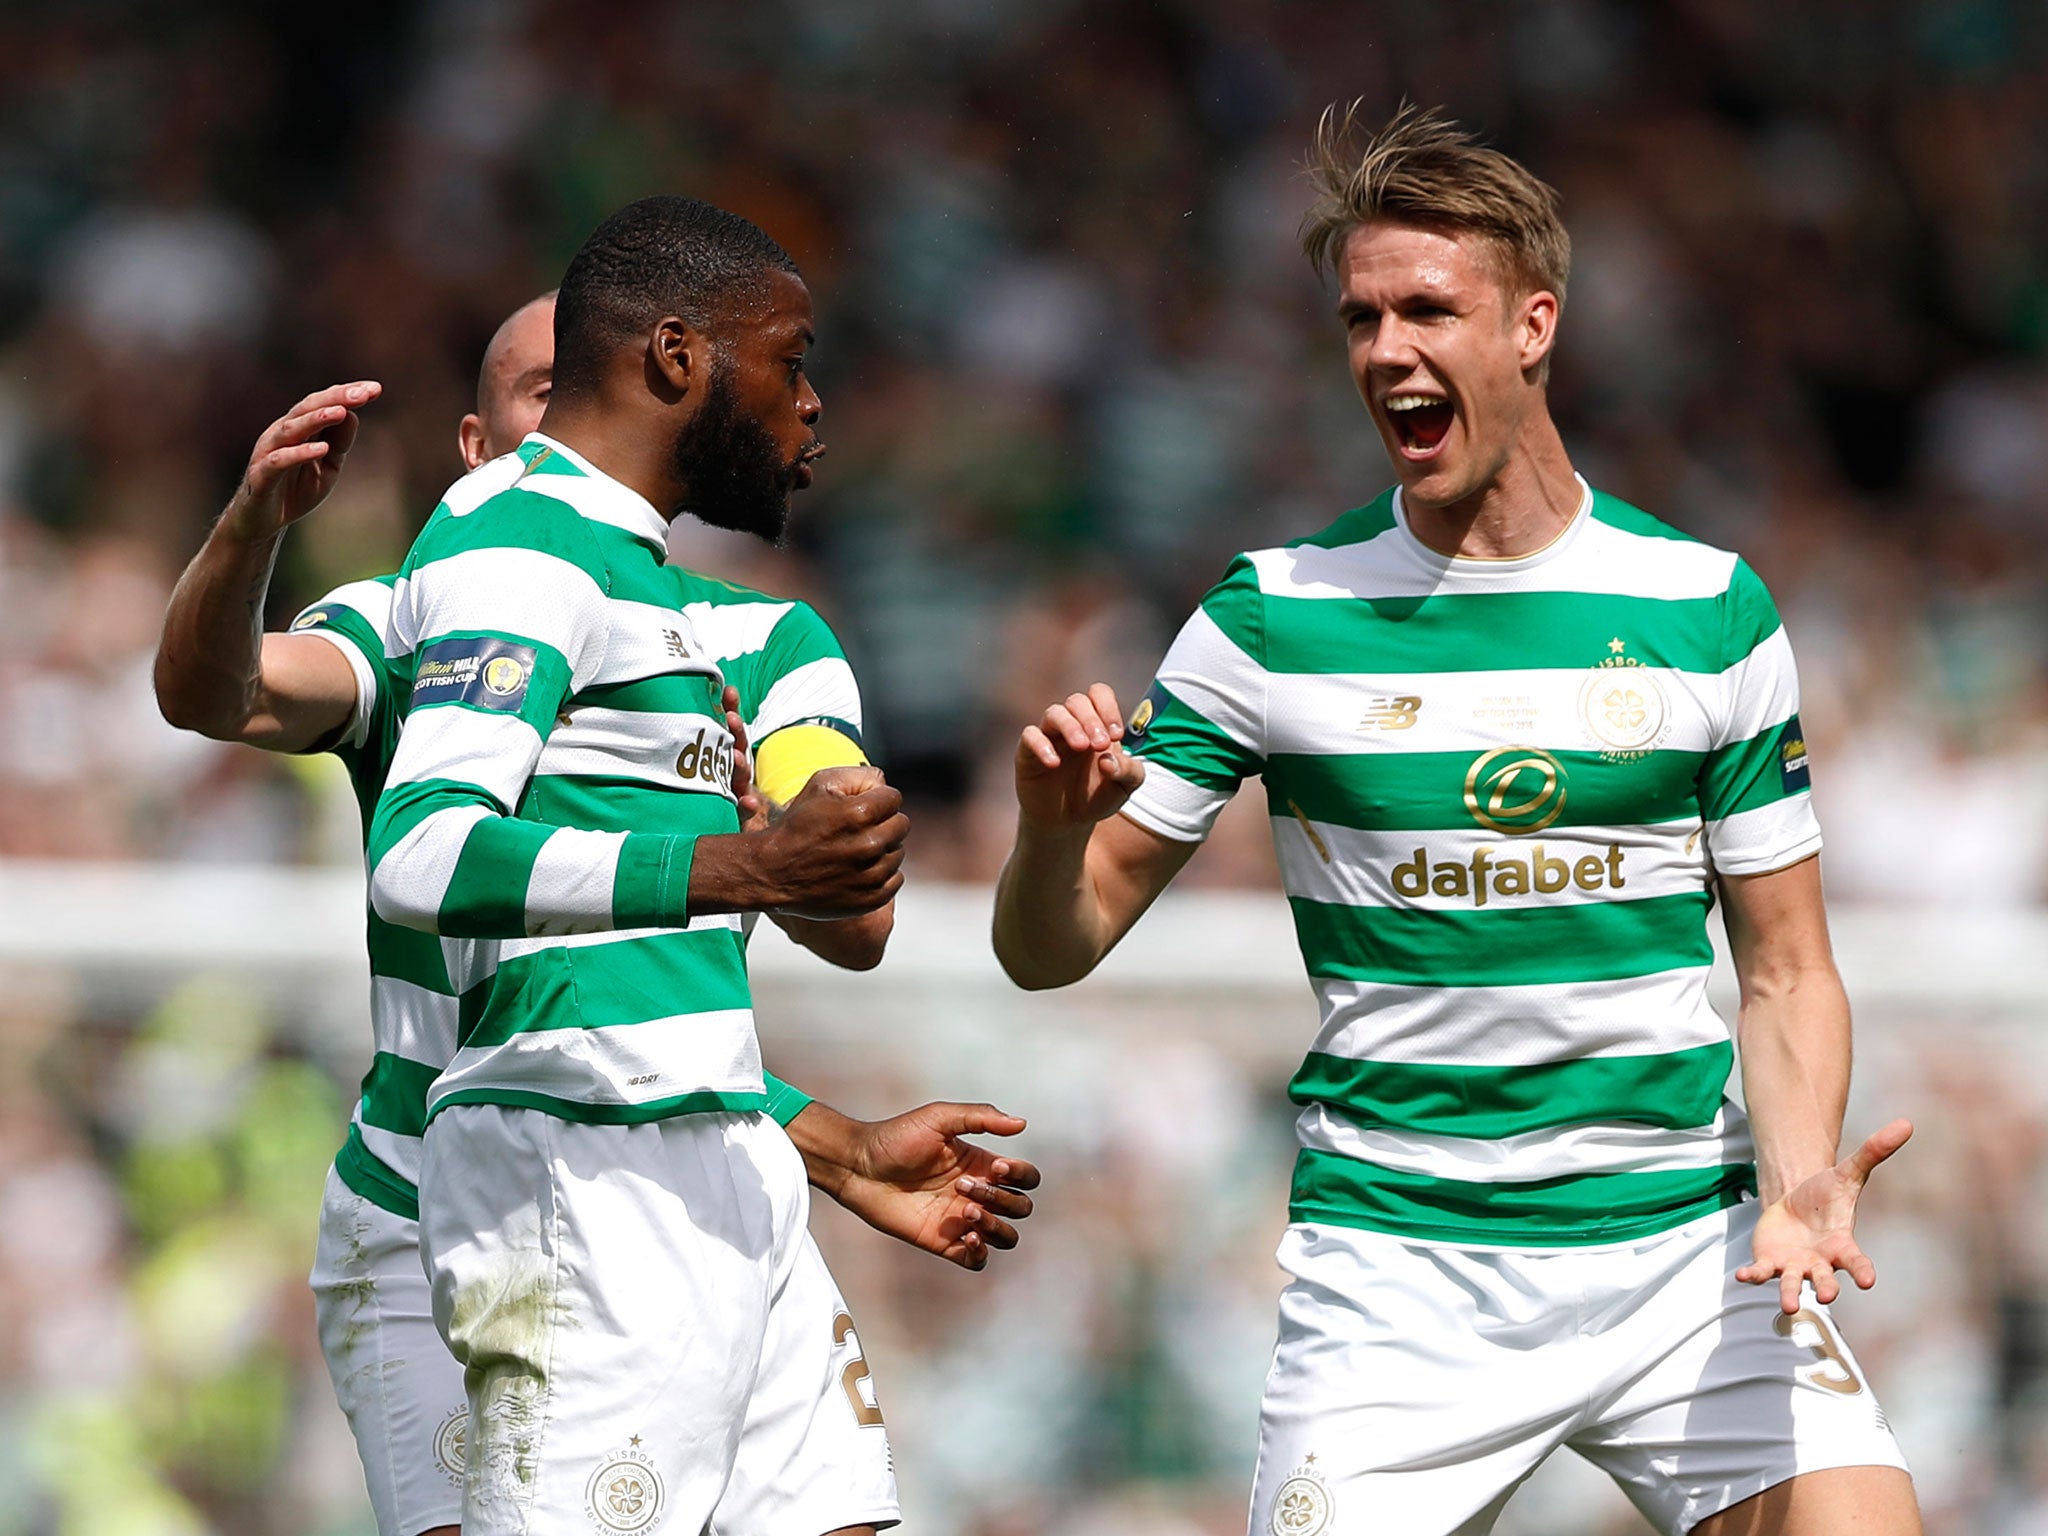 Celtic make light work of Motherwell to lift Scottish Cup and